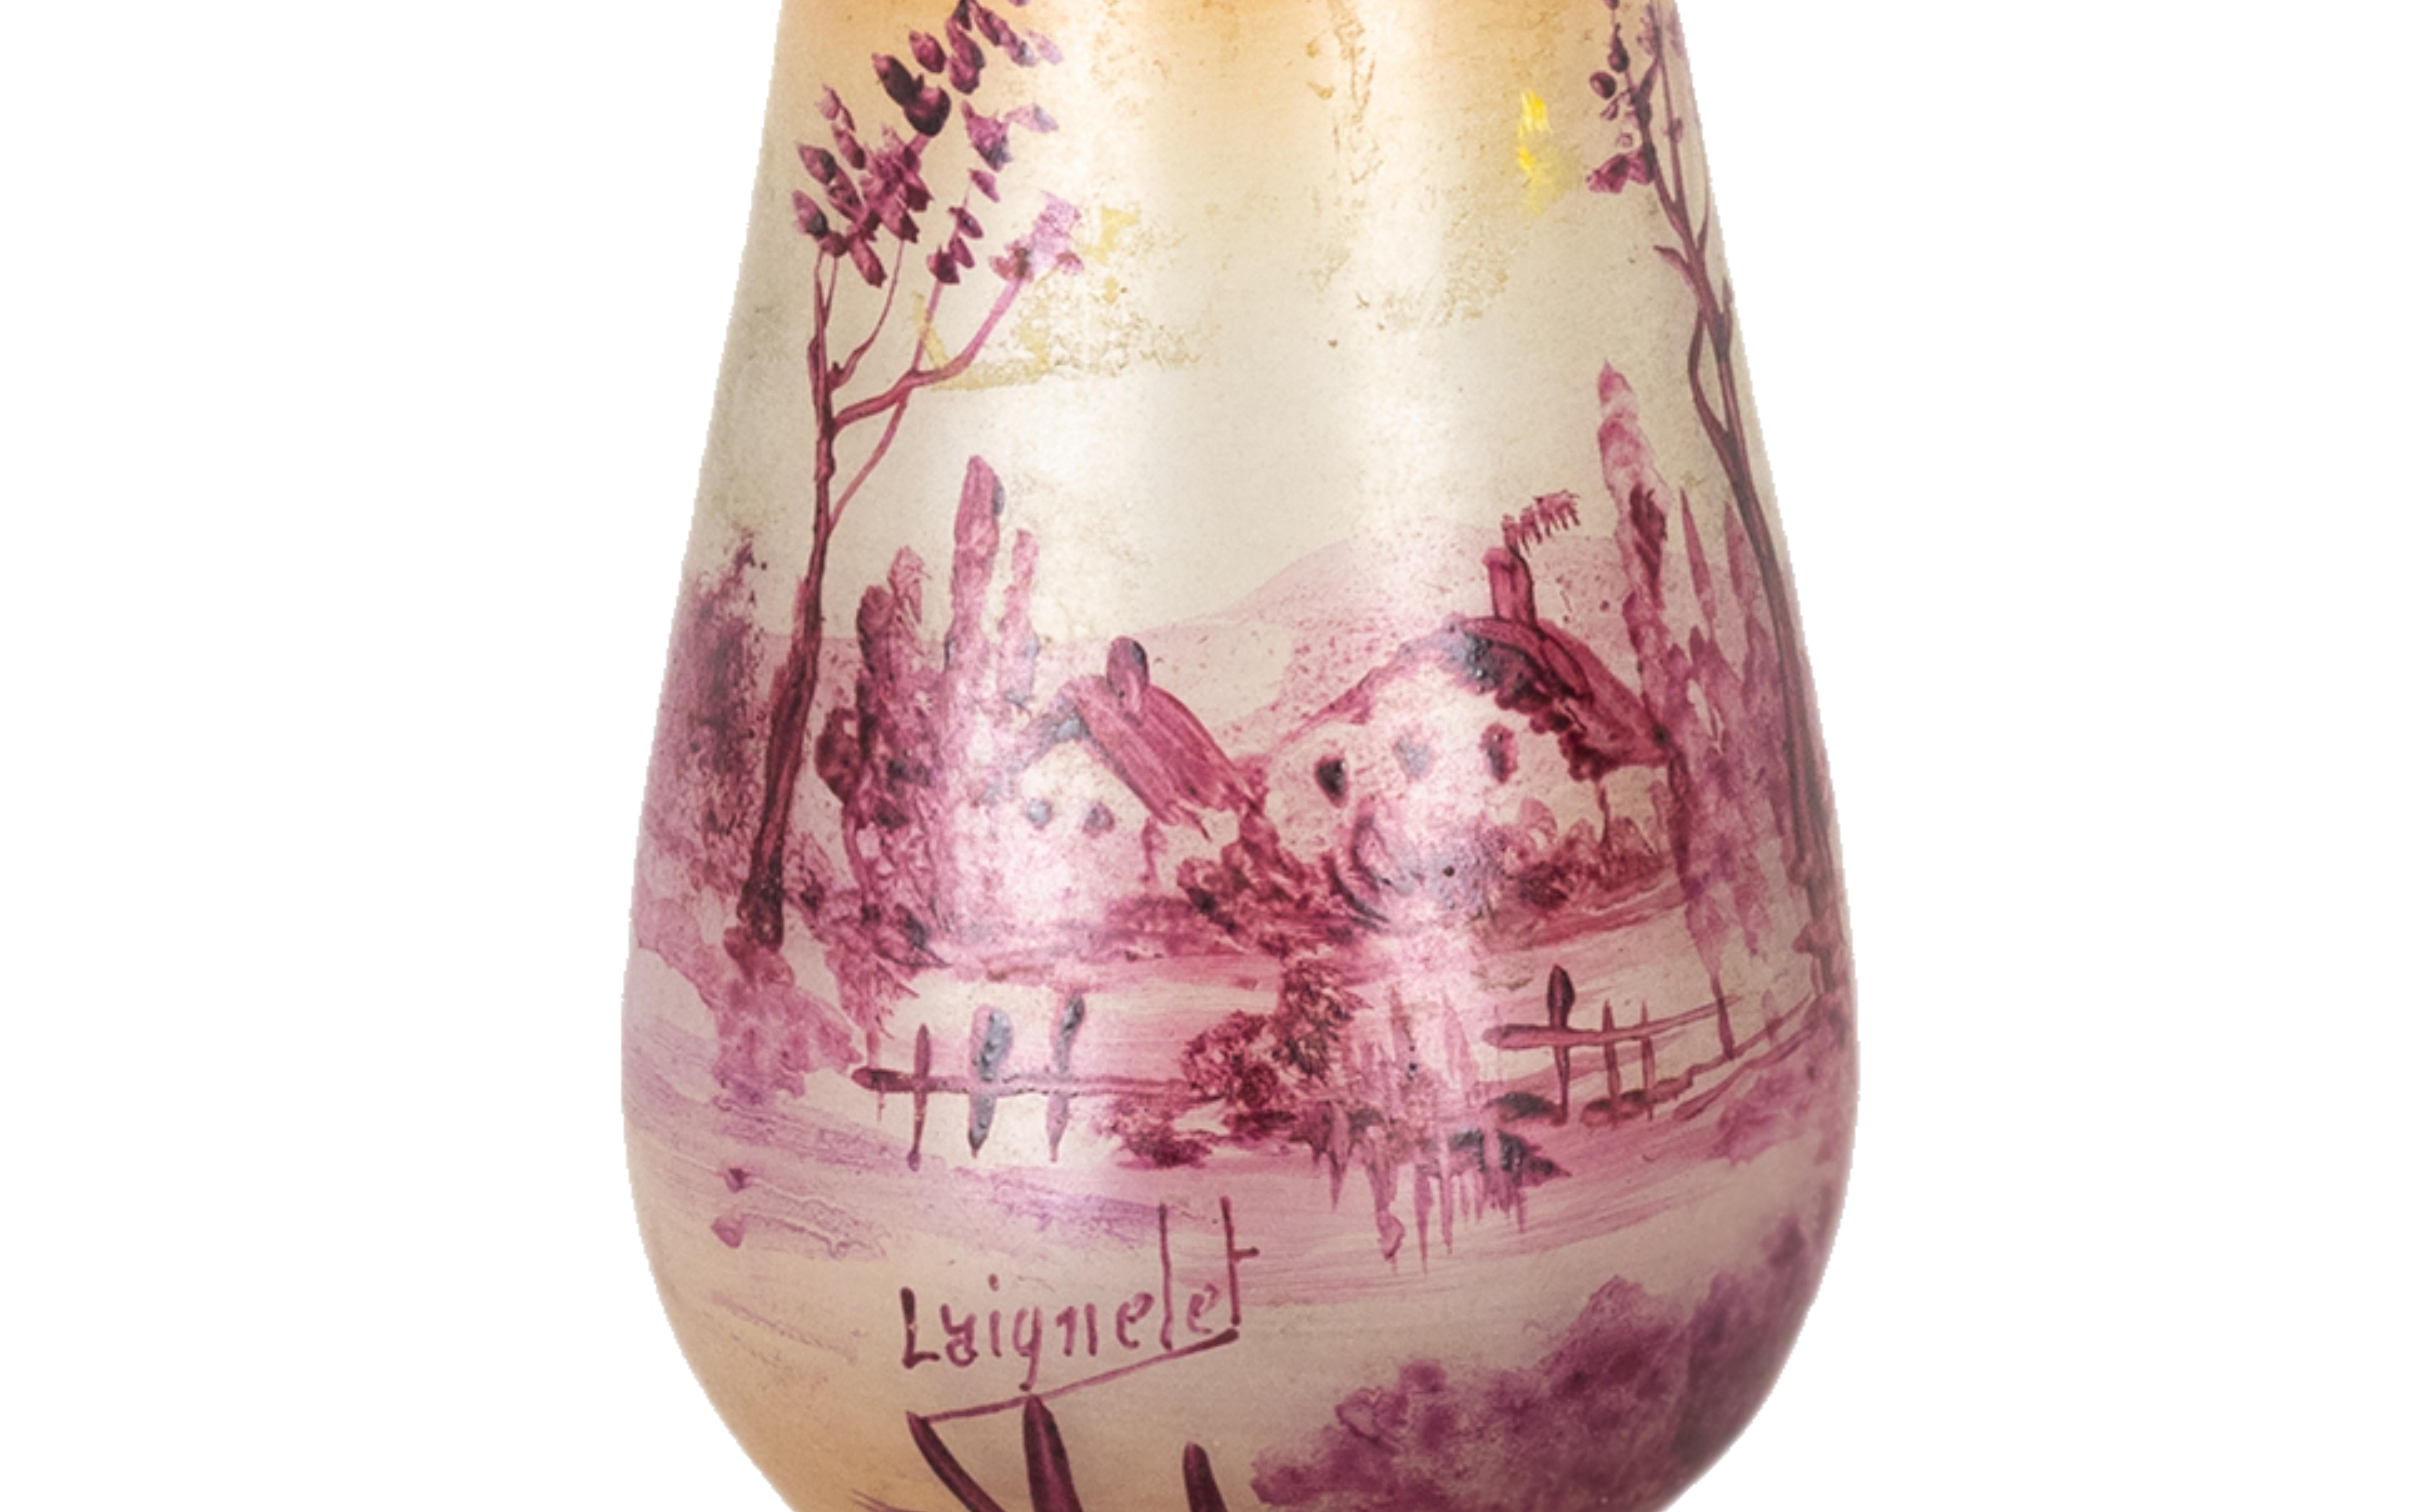 Vase from the Verrerie de Laignelet, signed 'Laignelet' in polychrome glass, with a pink background and a panoramic scene of the Brittany region with its characteristic regional houses.

La Verrerie de Laignelet was created in 1908 by H. Chupin who